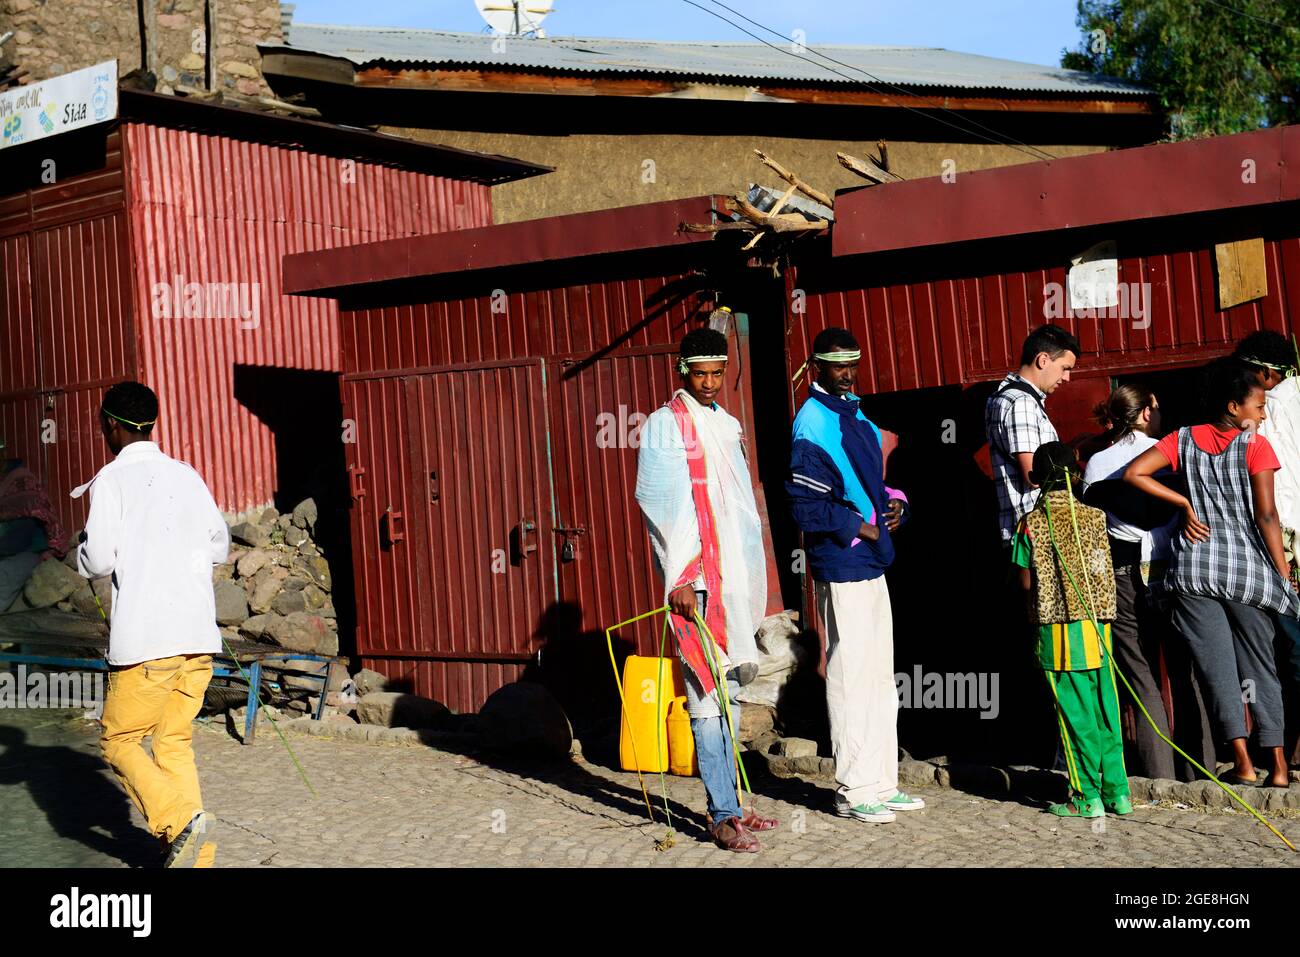 Ethiopians and tourist at a bus ticket office  in Lalibela, Ethiopia. Stock Photo